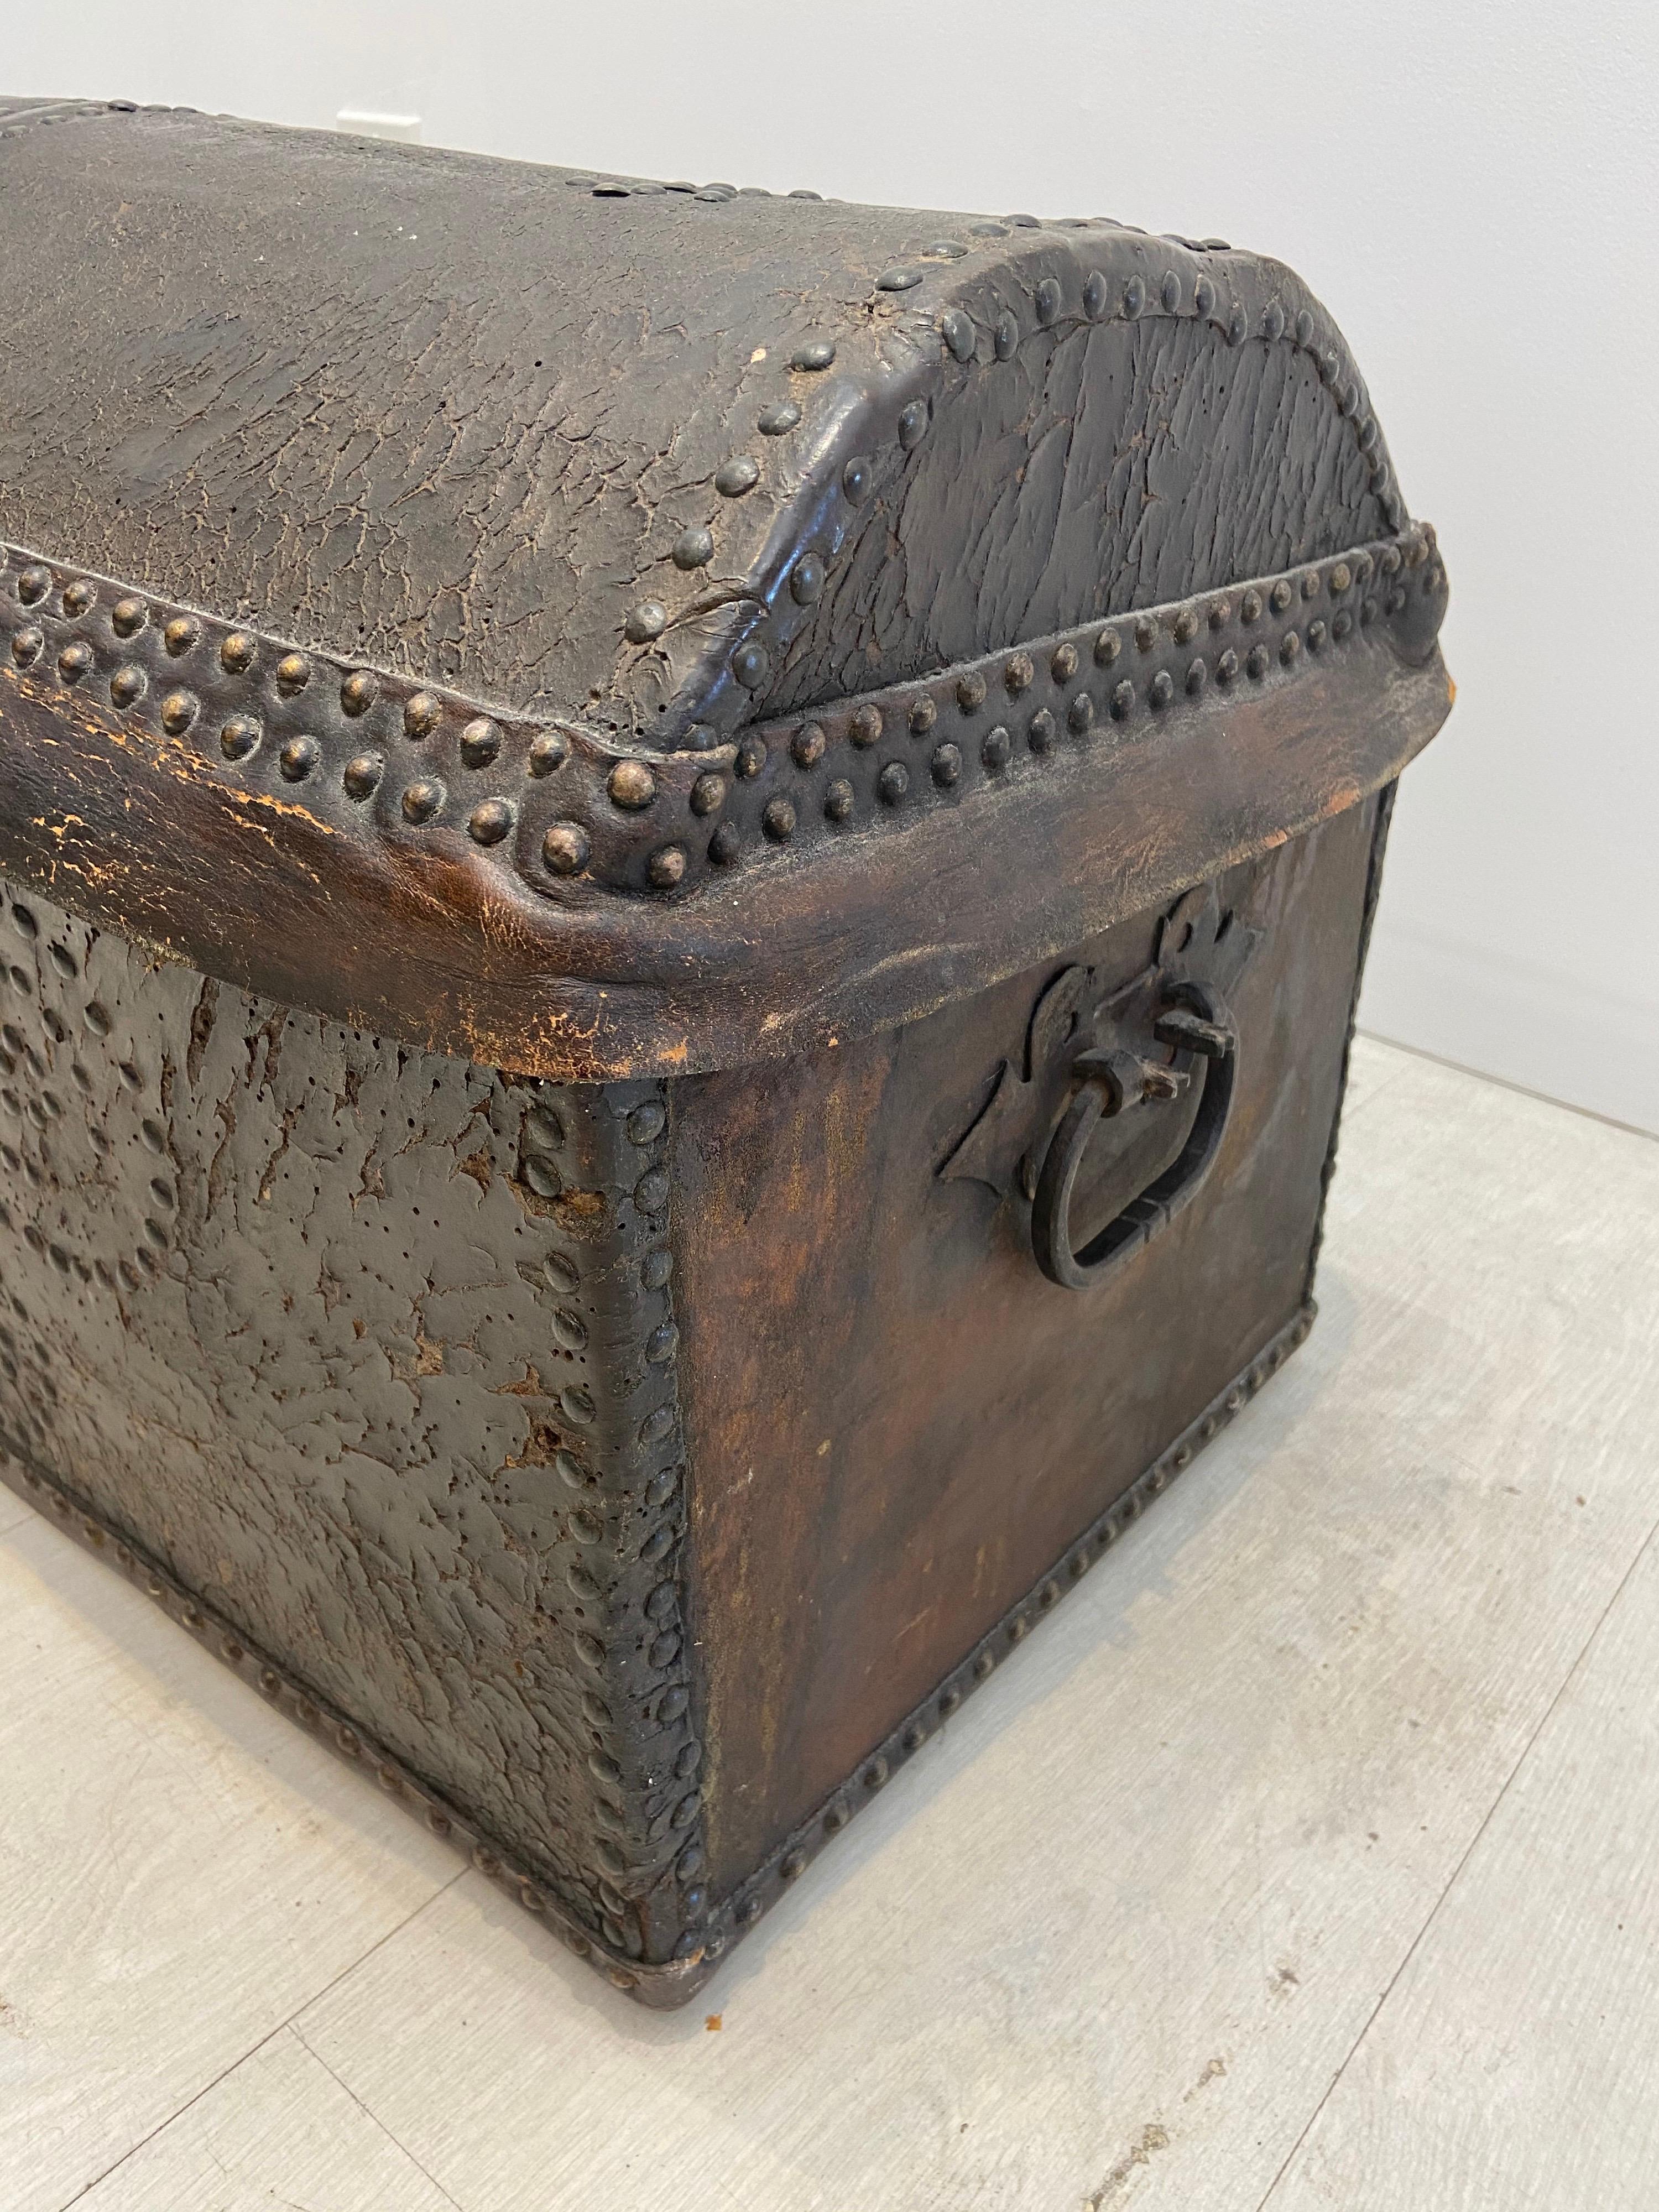 18th century leather dome top trunk in good condition… With brass nail heads and brass bail pulls at the sides… The front lock does not work but the back plate as well as the strap hinges are all original… Interior has been lined with linen… Part of